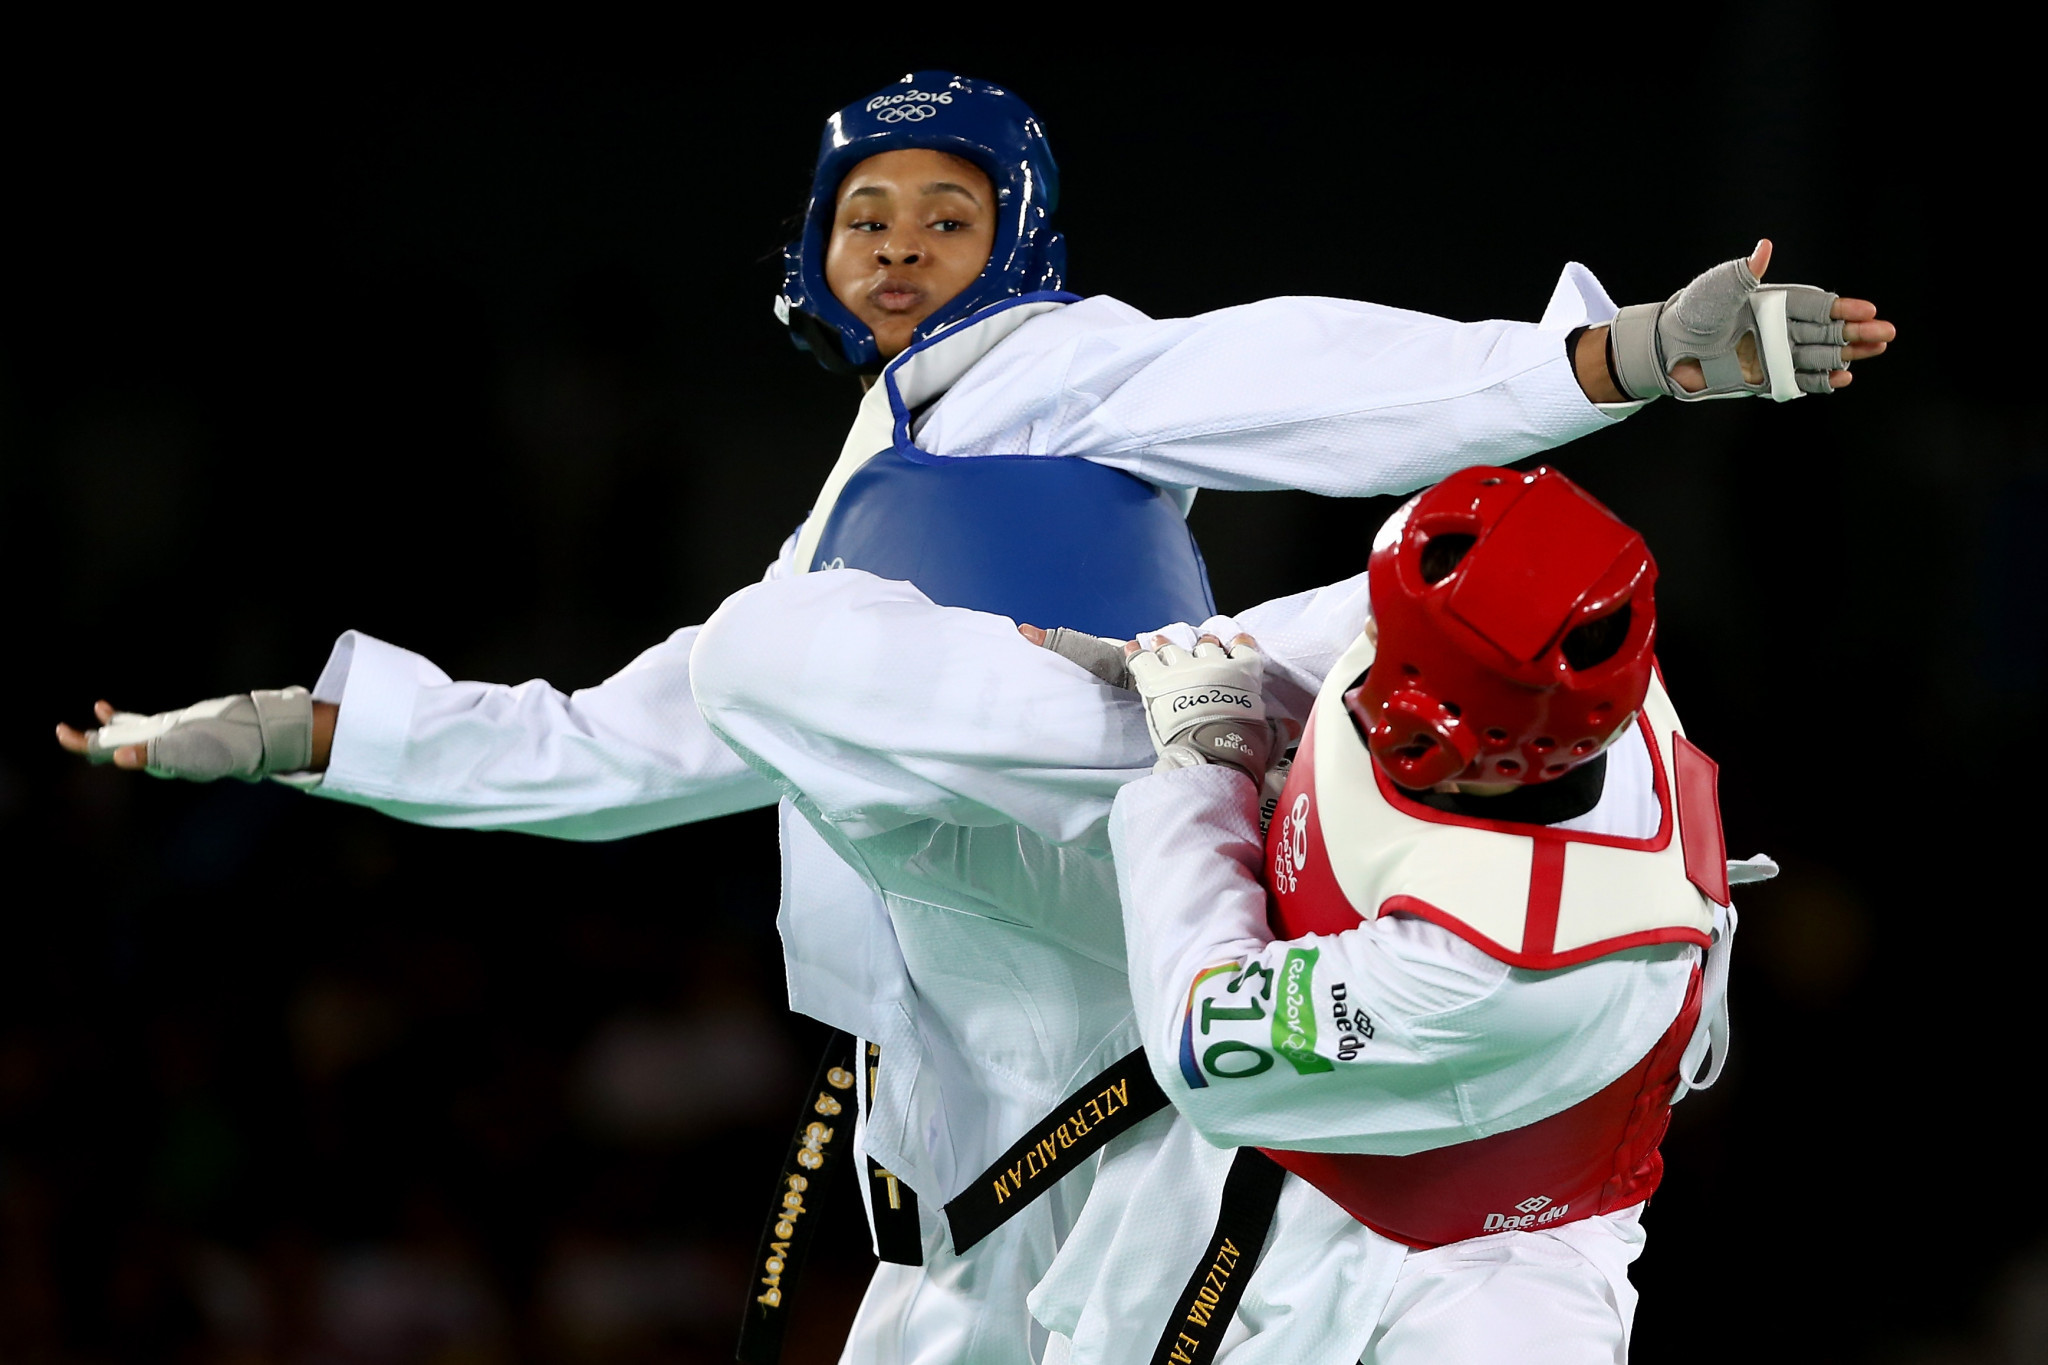 Paige McPherson will be aiming for her third Pan American Games medal after being named on the United States' taekwondo team for Lima 2019 ©Getty Images